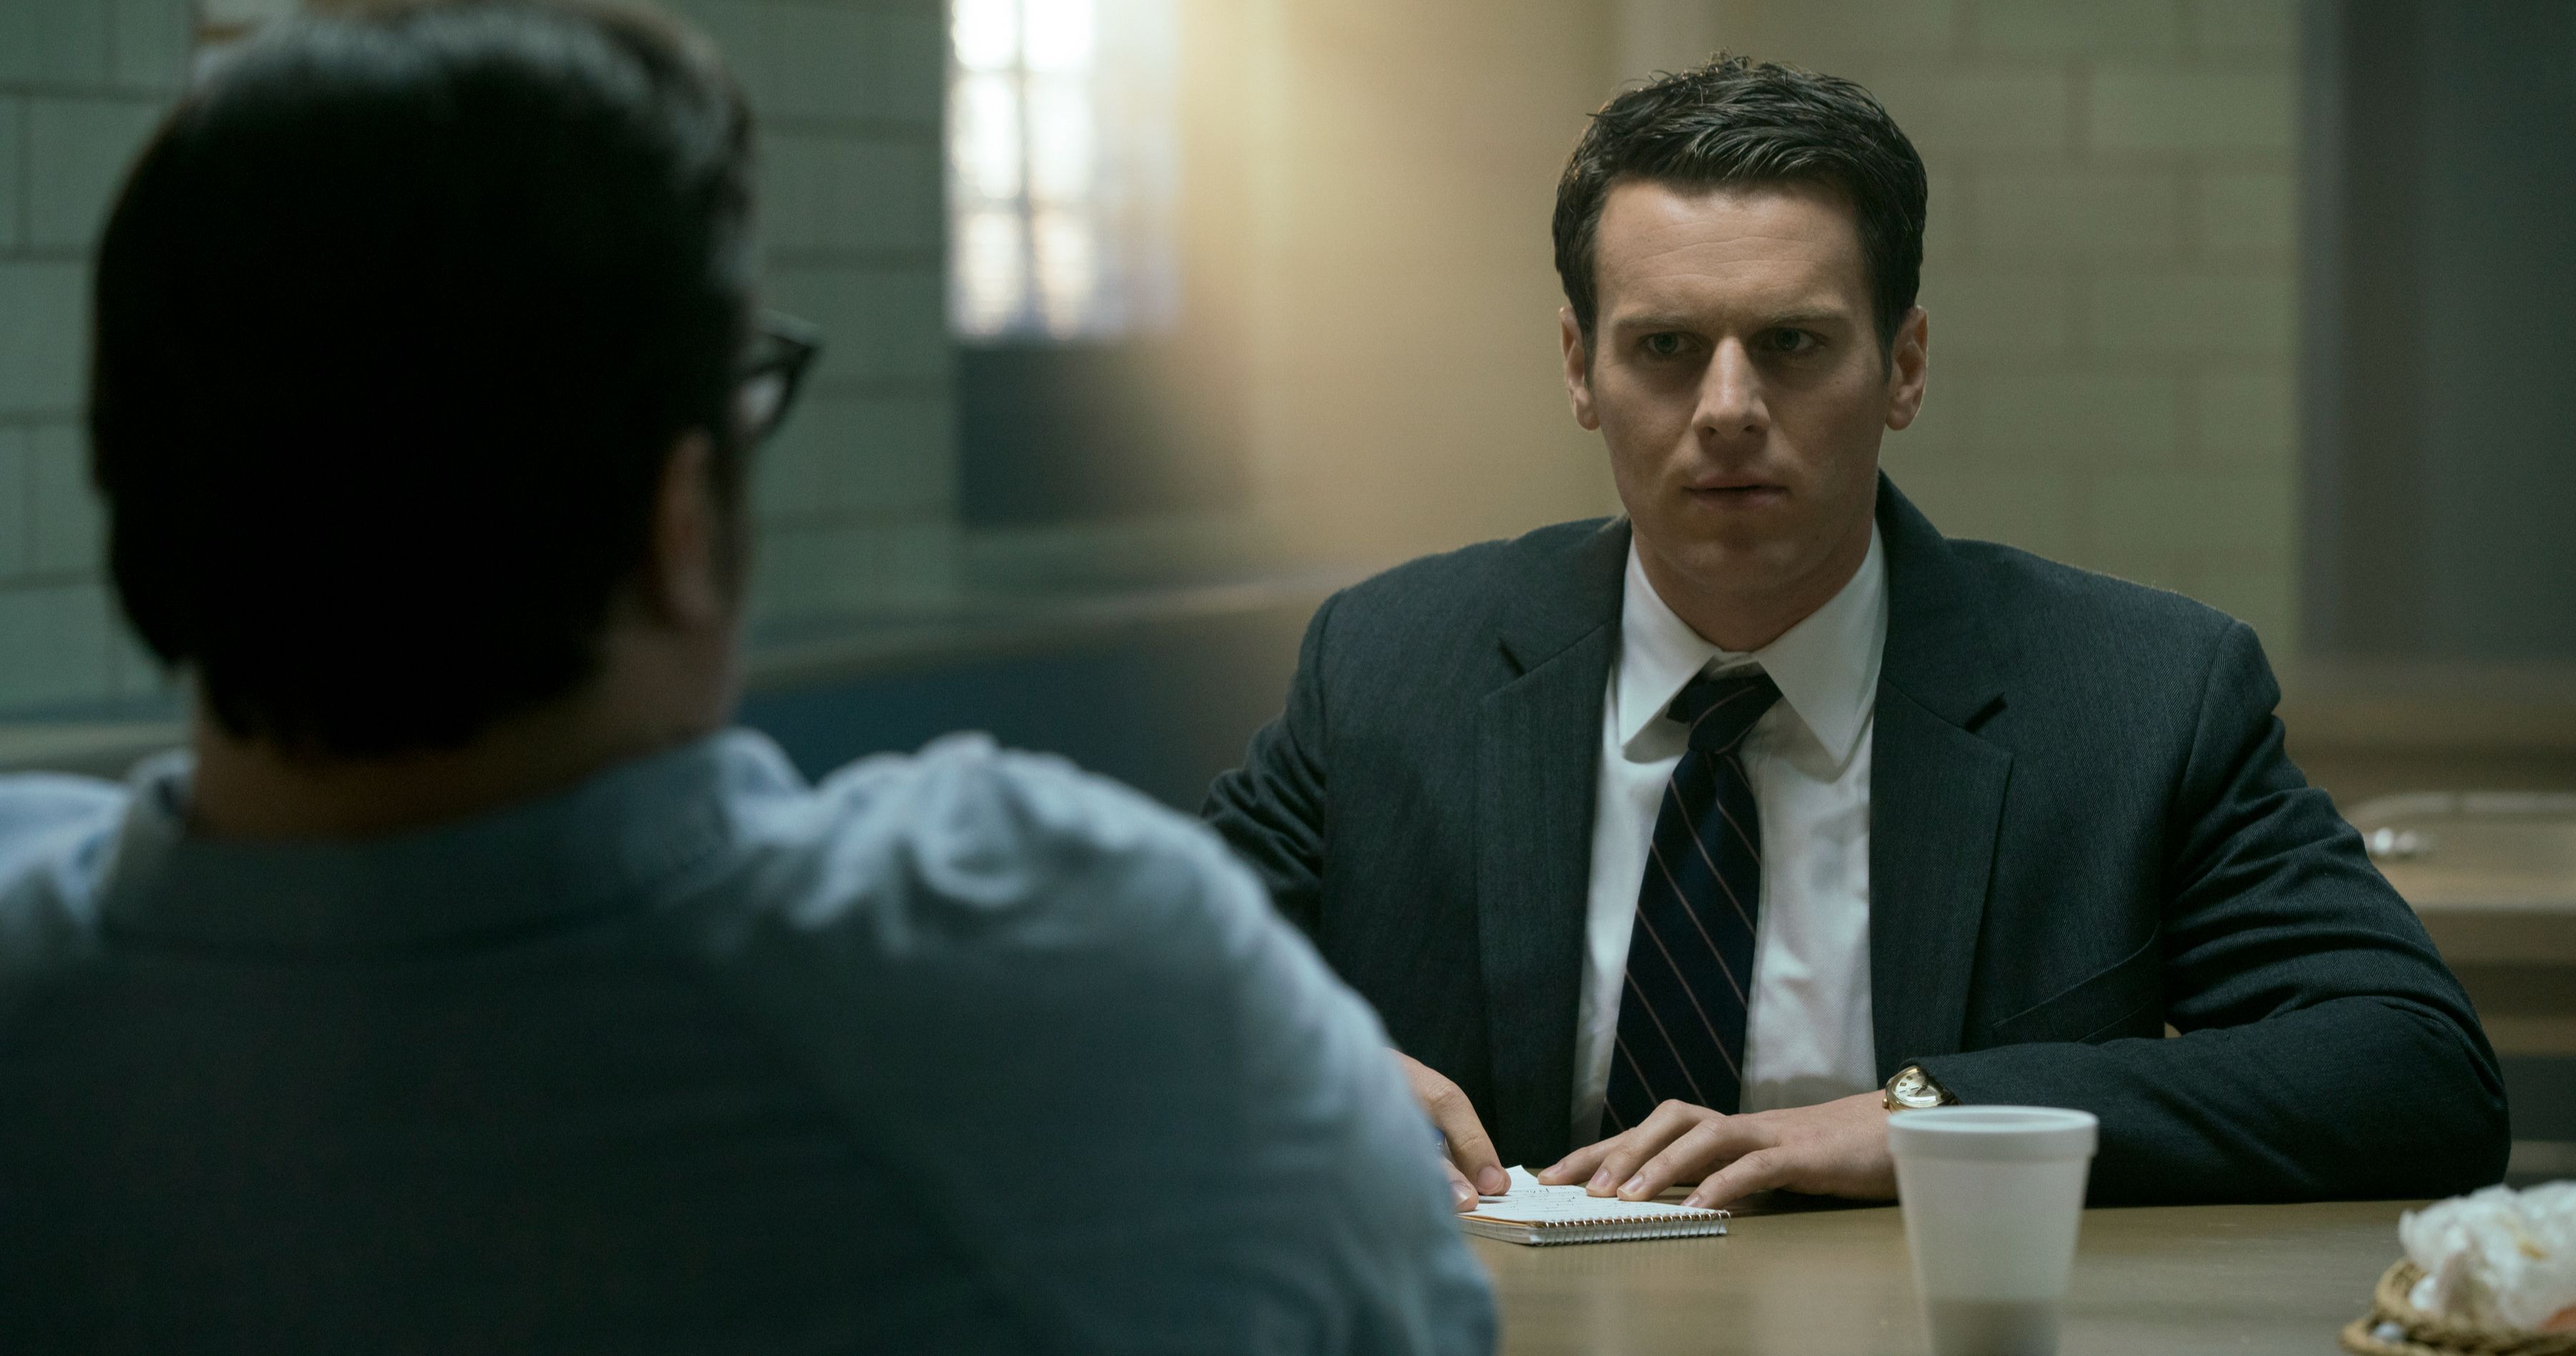 Mindhunter Director Says Season 3 Might Happen If Fans 'Make Enough Noise'